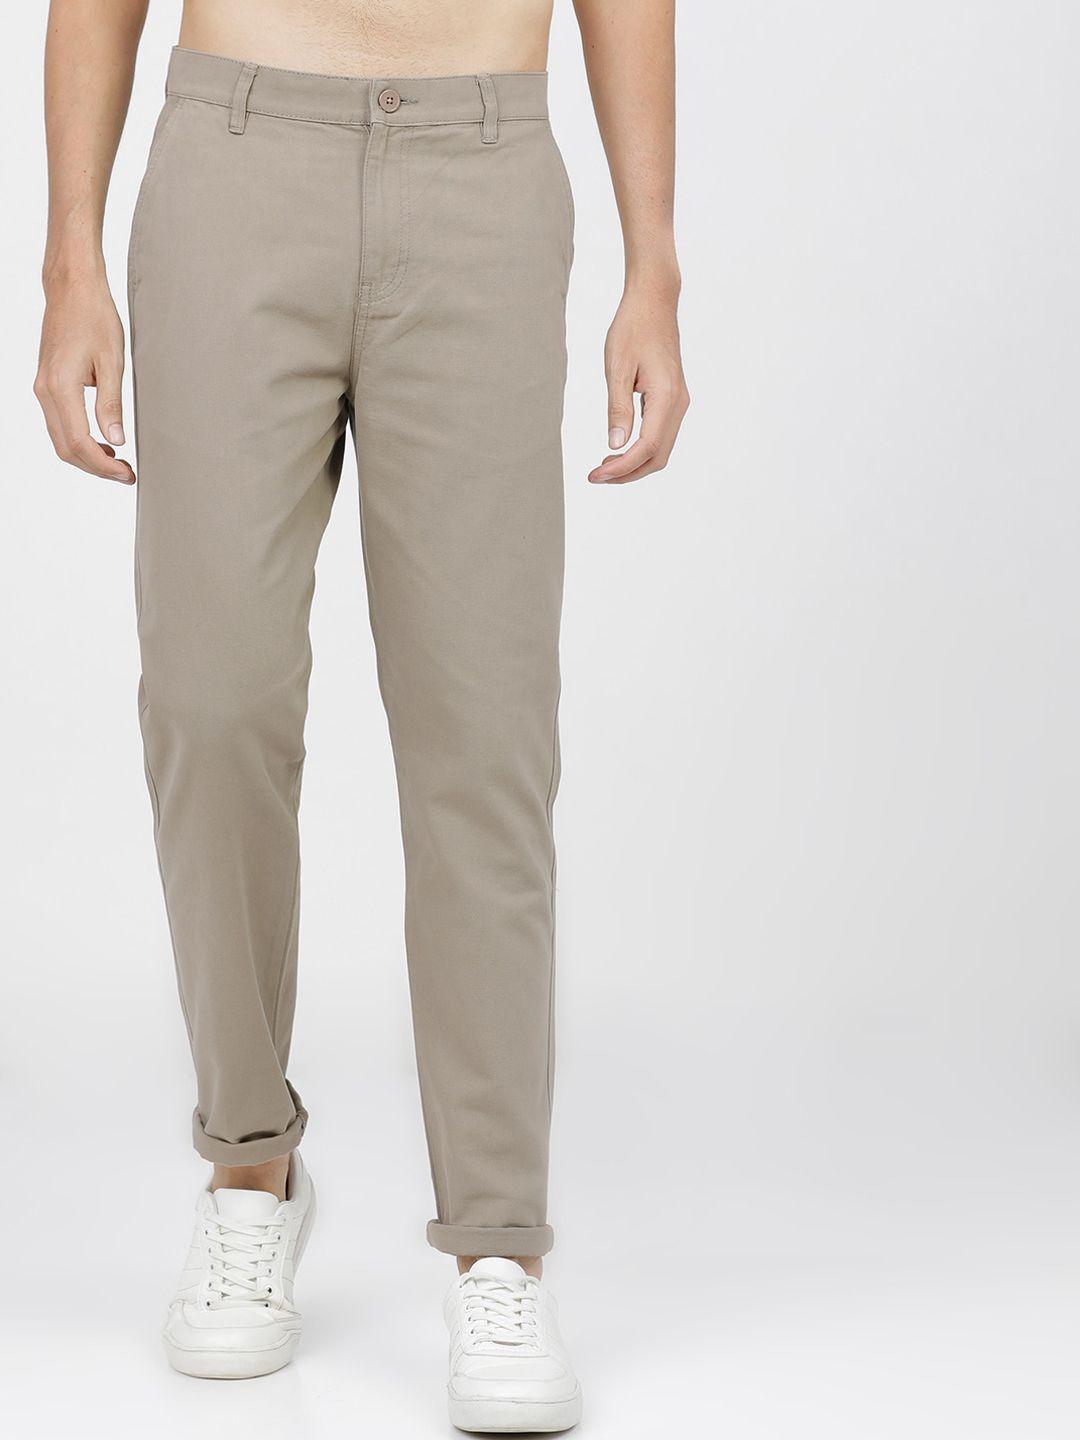 ketch-men-beige-solid-slim-fit-easy-wash-chinos-trousers